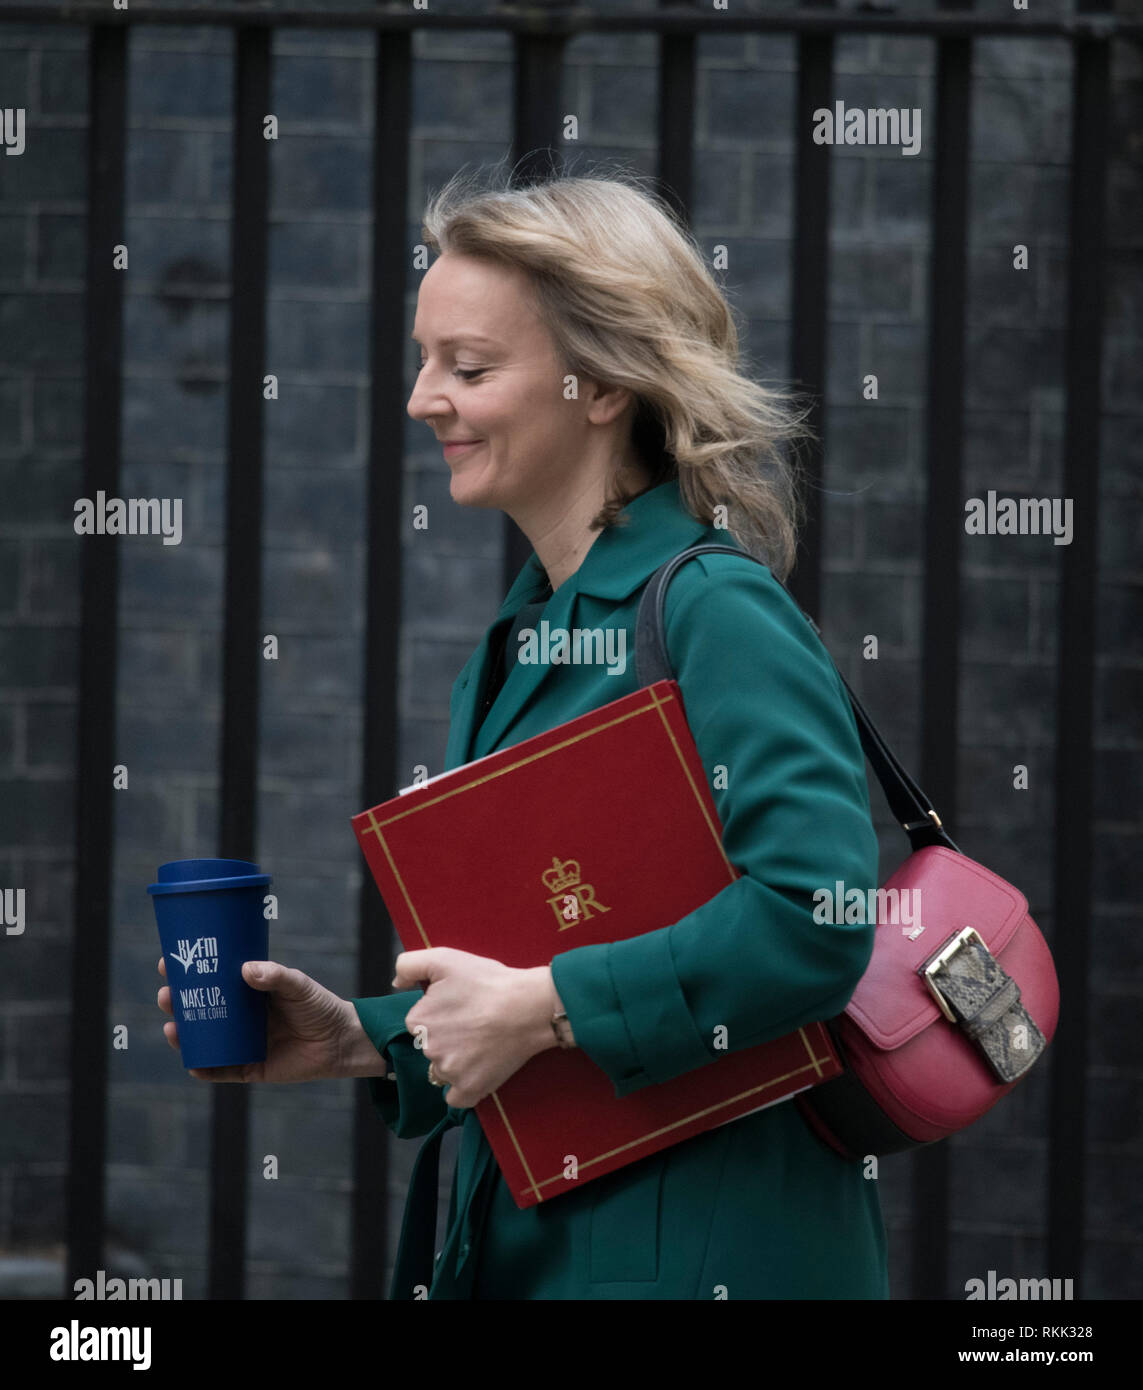 Downing Street, London, UK. 12 February 2019. Government Ministers arrive in Downing Street for weekly cabinet meeting. Elizabeth Truss, Chief Secretary to the Treasury. Credit: Malcolm Park/Alamy Live News. Stock Photo